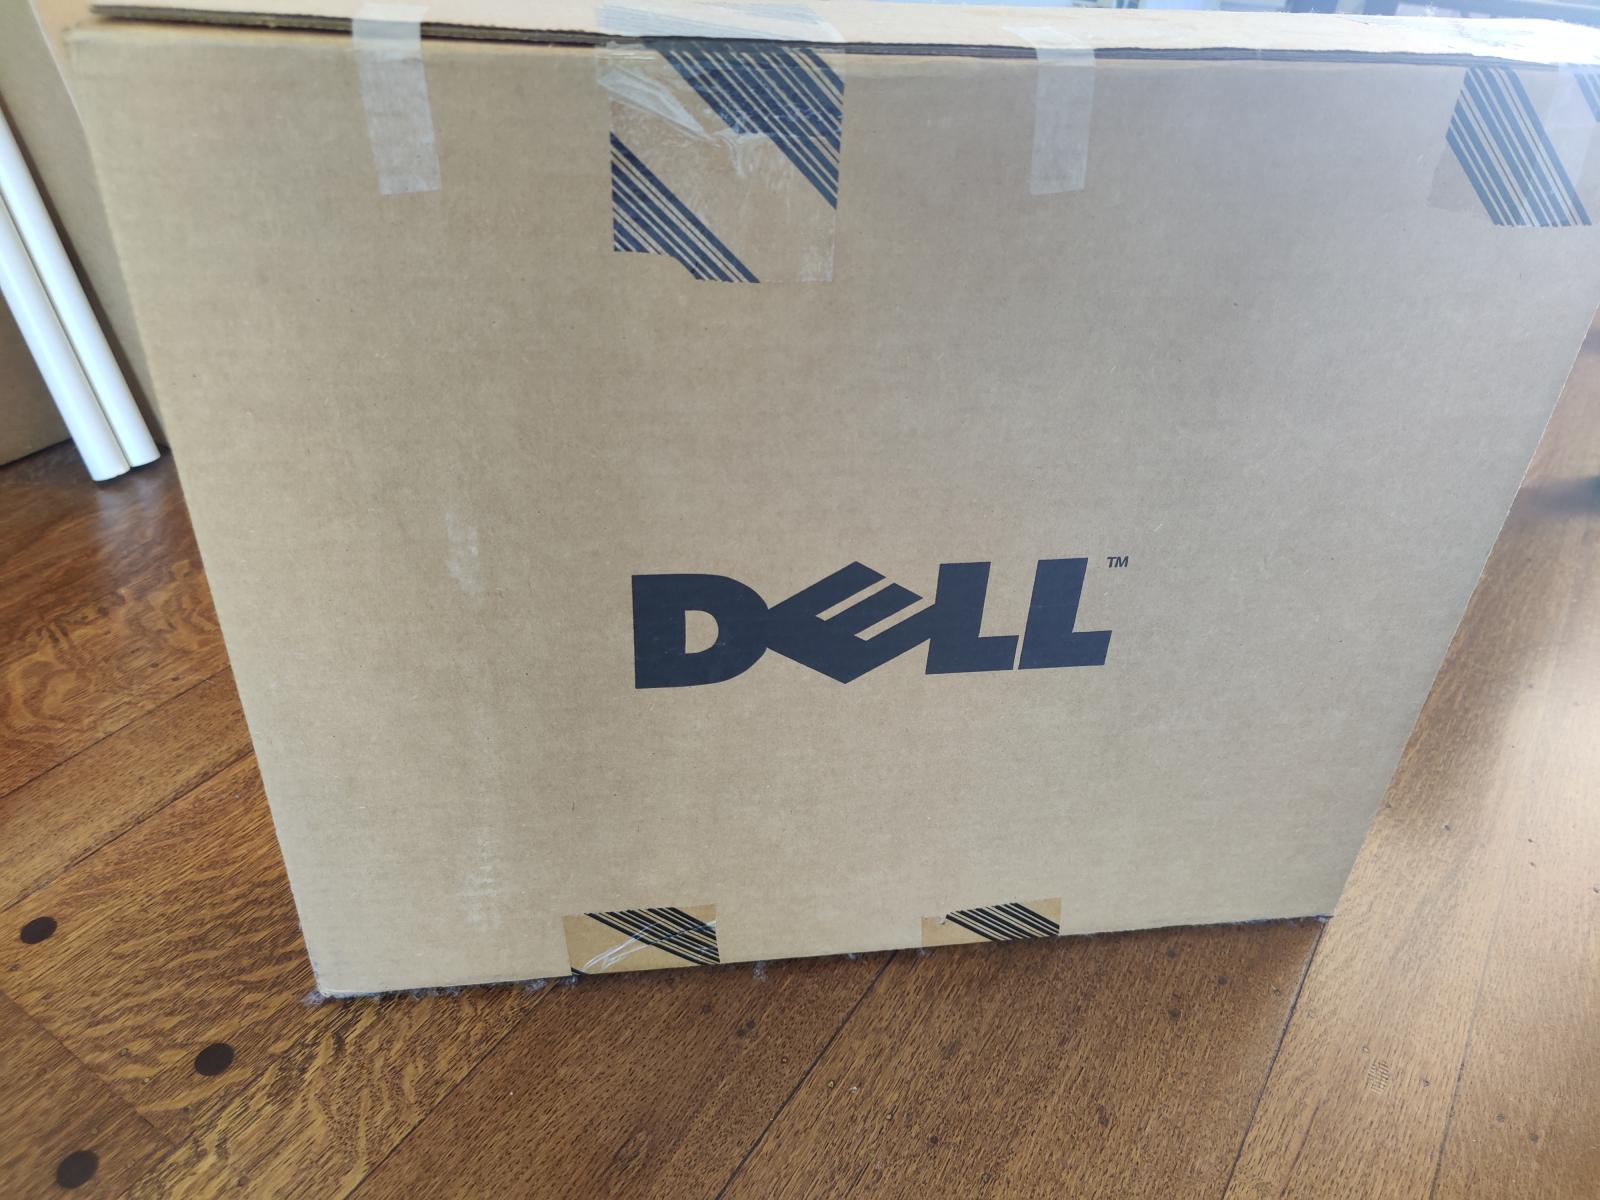 Photo of Dell Latitude 5480 - loaded with i7-7820HQ, 32GB RAM, 500GB SSD, etc.